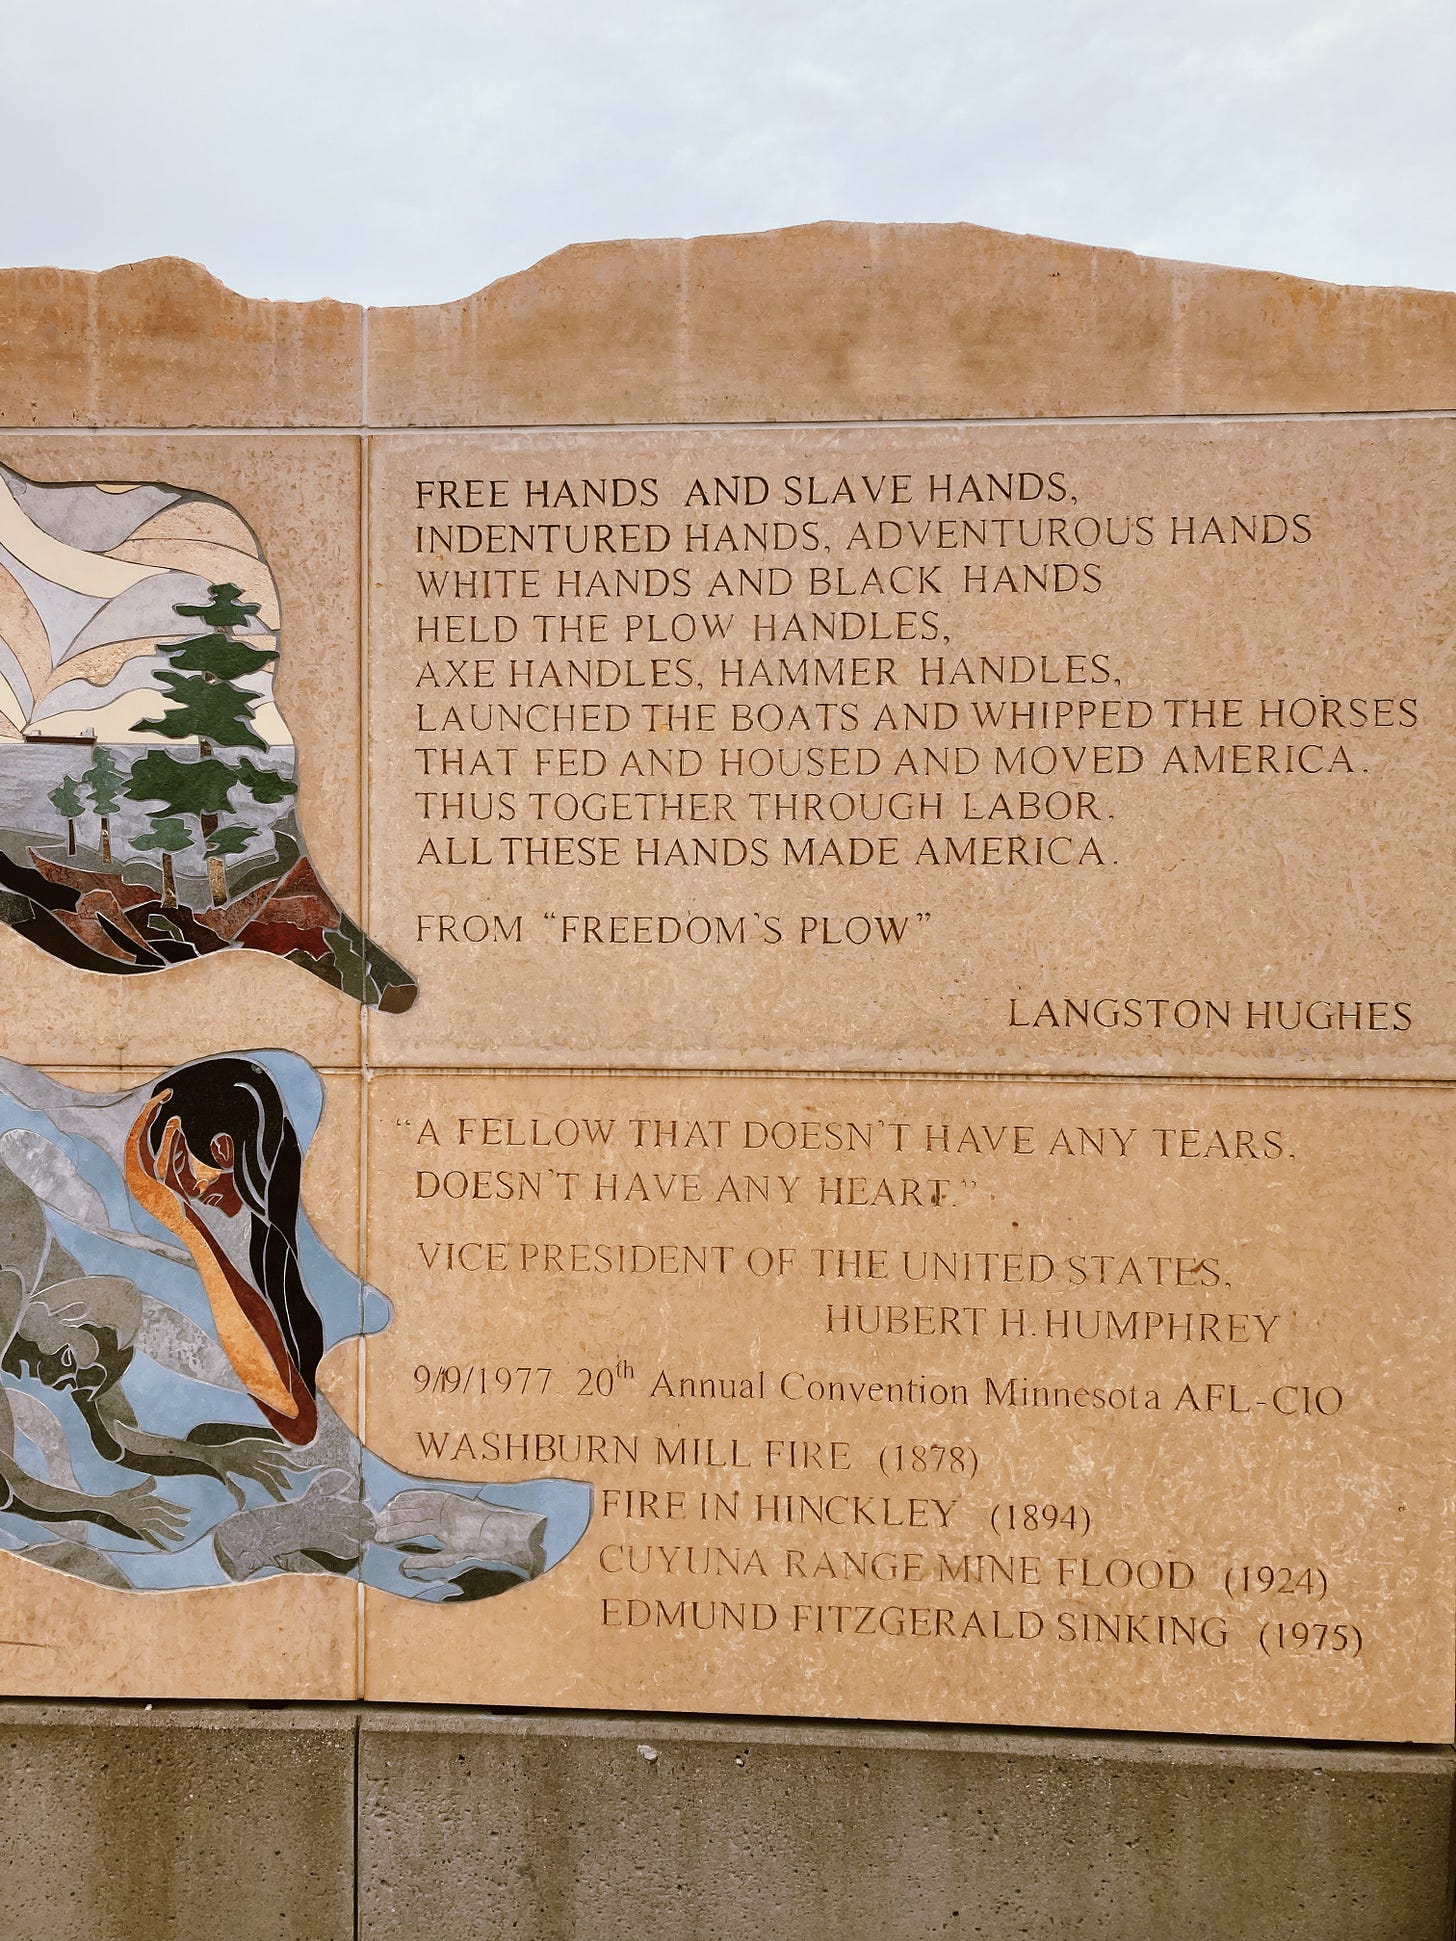 a beige monument with an exerpt of langston hughes' freedom's plow poem and a quote from hubert humphrey also shows a bit of an impressionist mural